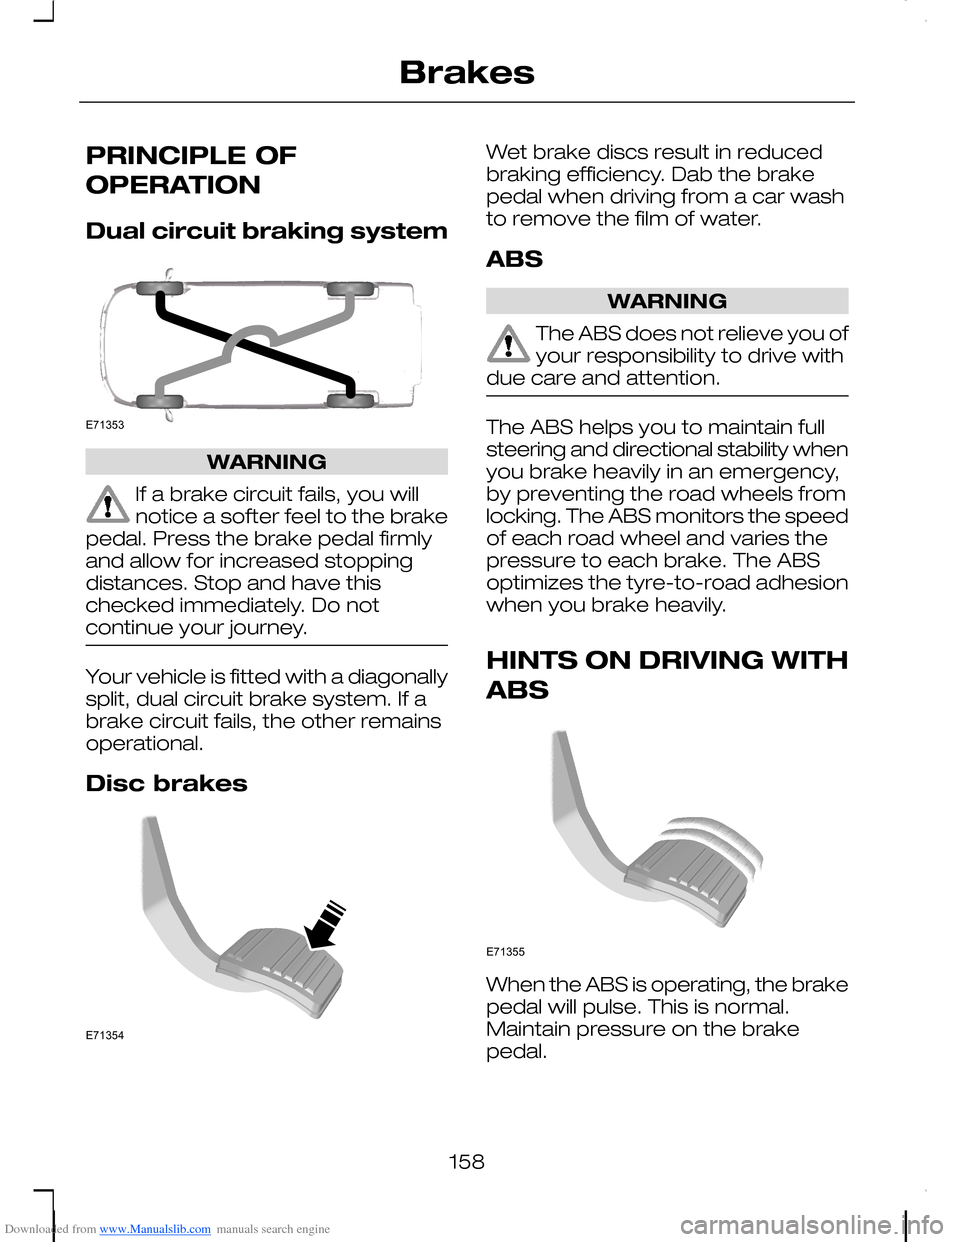 FORD C MAX 2008 1.G Owners Manual Downloaded from www.Manualslib.com manuals search engine PRINCIPLE OF
OPERATION
Dual circuit braking system
WARNING
If a brake circuit fails, you willnotice a softer feel to the brakepedal. Press the 